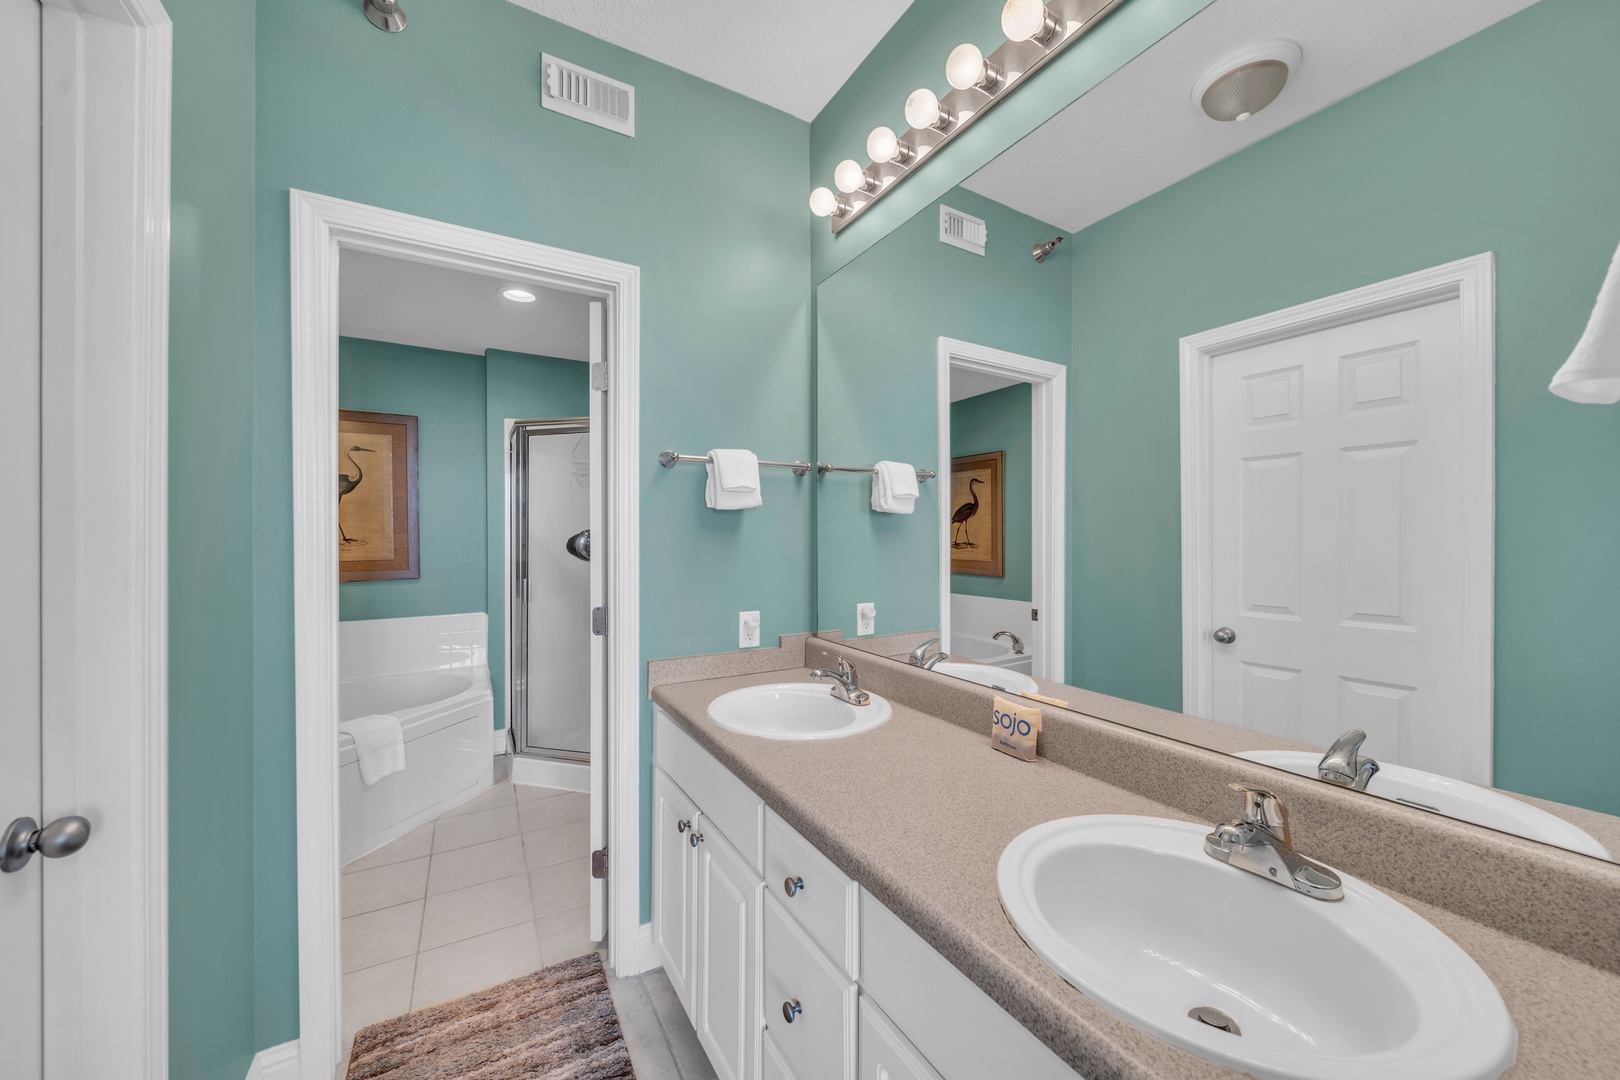 The Primary Bedroom boasts a large walk-in closet, a private dressing area with two sinks.